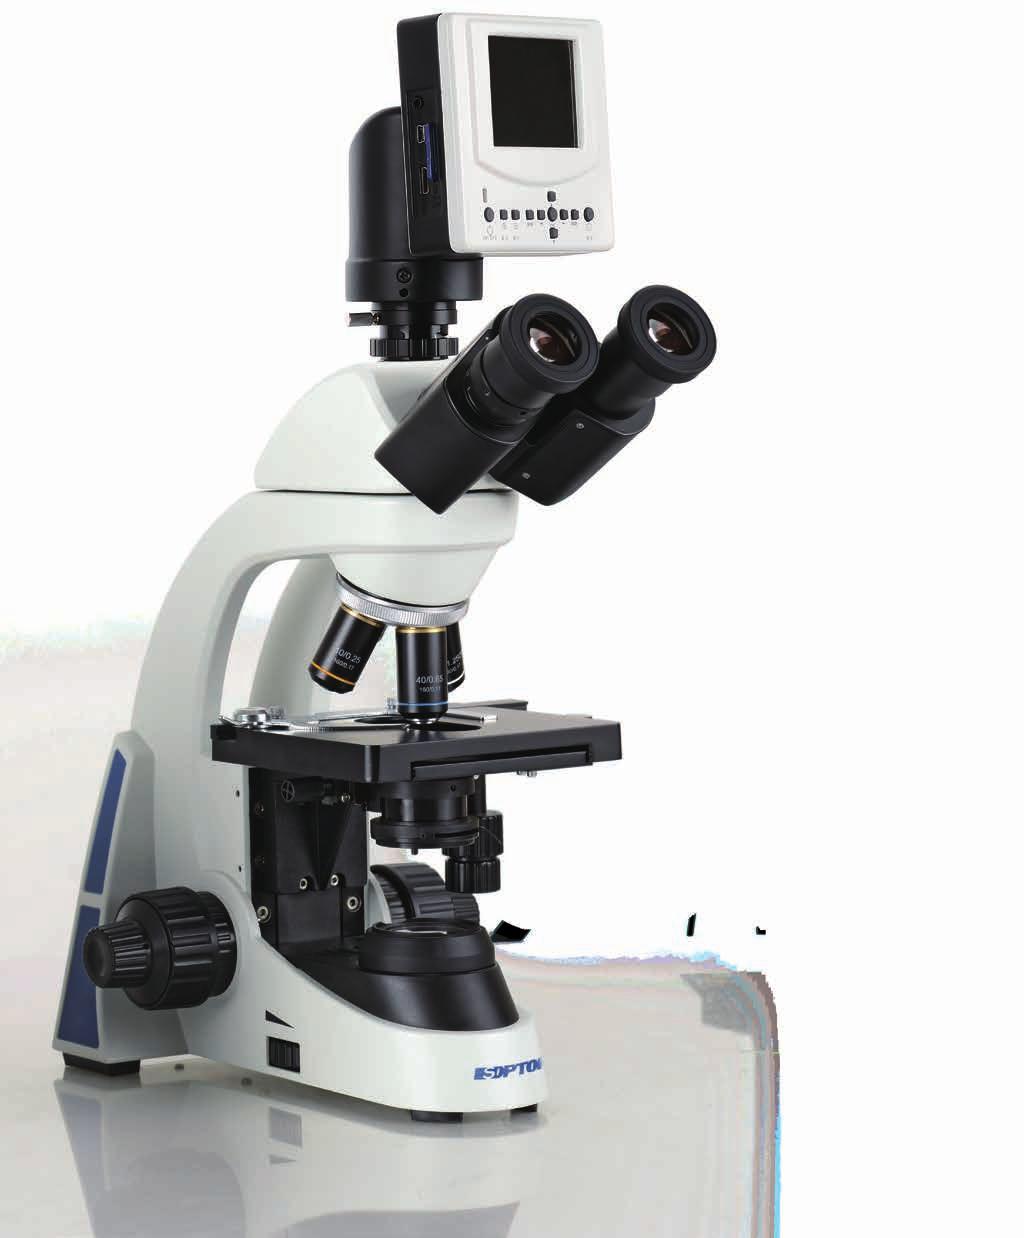 With E5 trinocular microscope and digital microscope, photograph, storage, analysis and transmission are achievable.